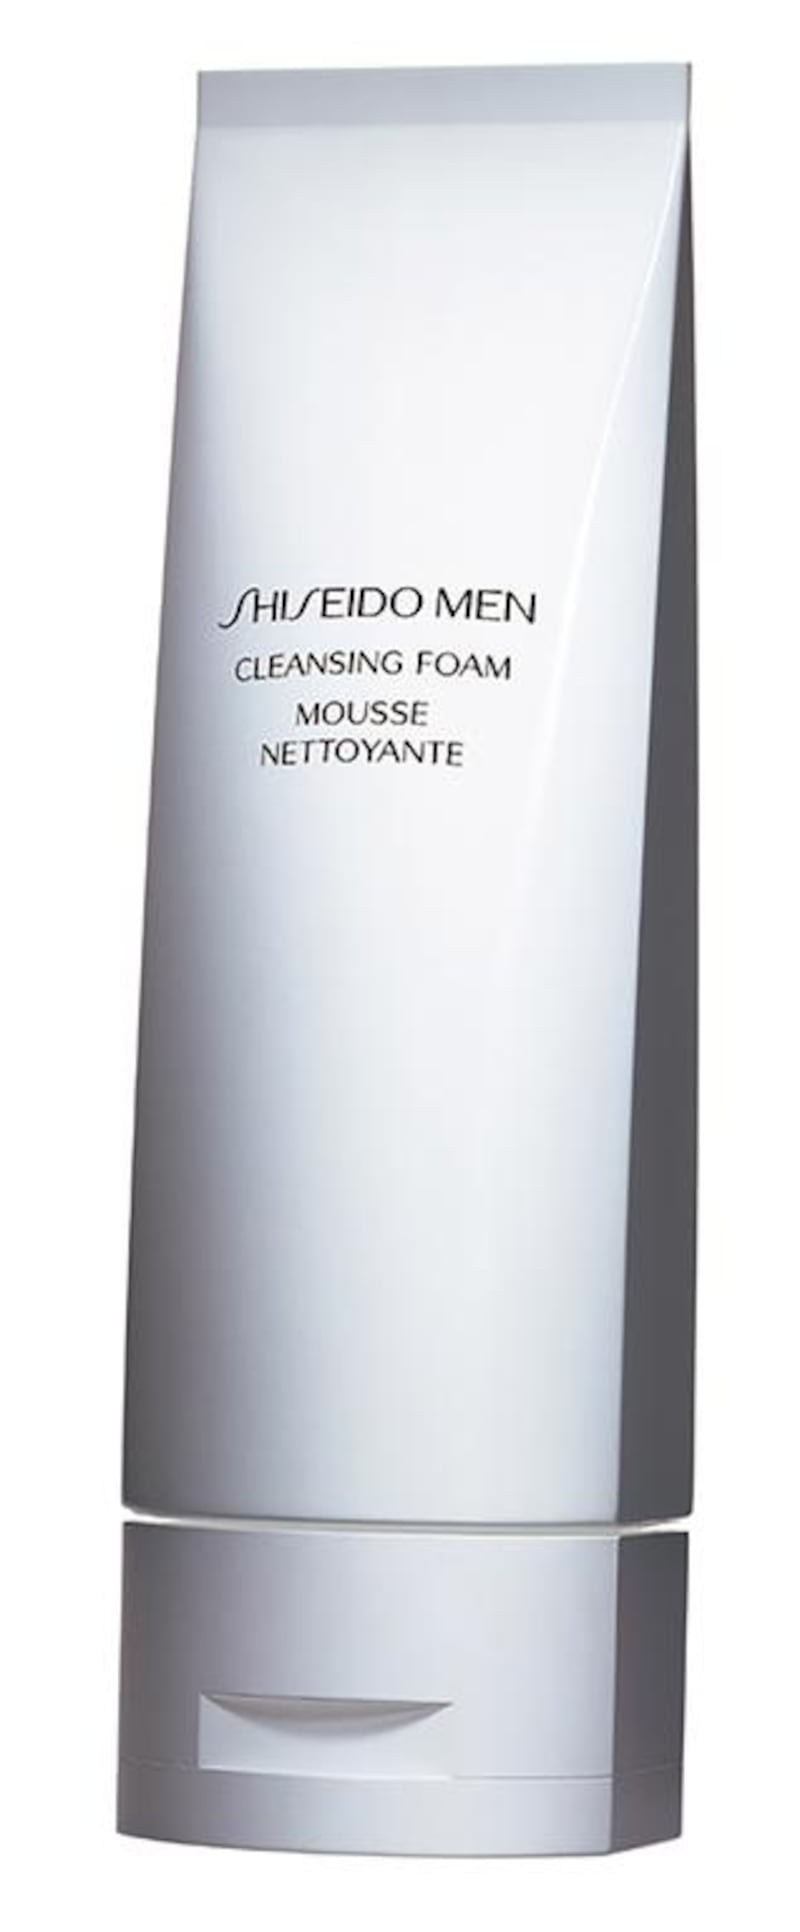 Cleansing foam from Shiseido's men's grooming collection. Courtesy Shiseido